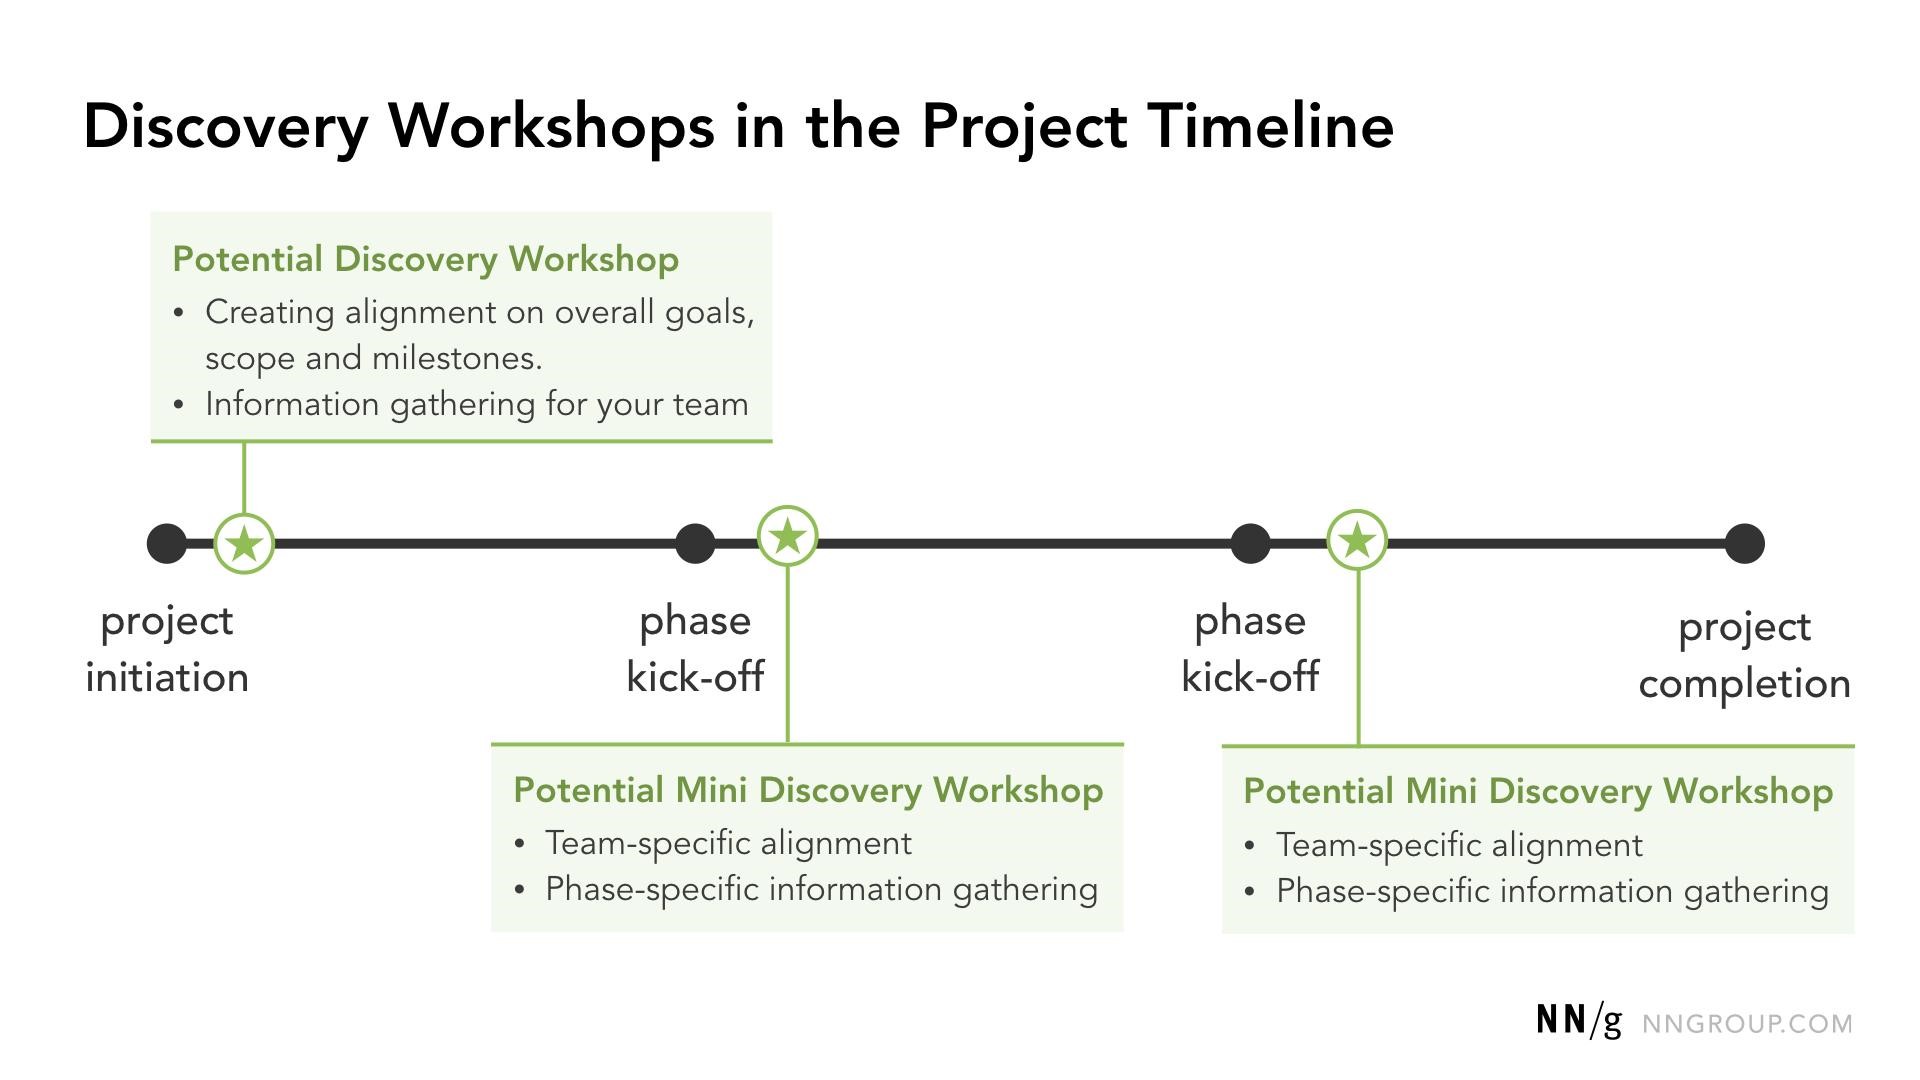 Discovery Workshops in the Project Timeline